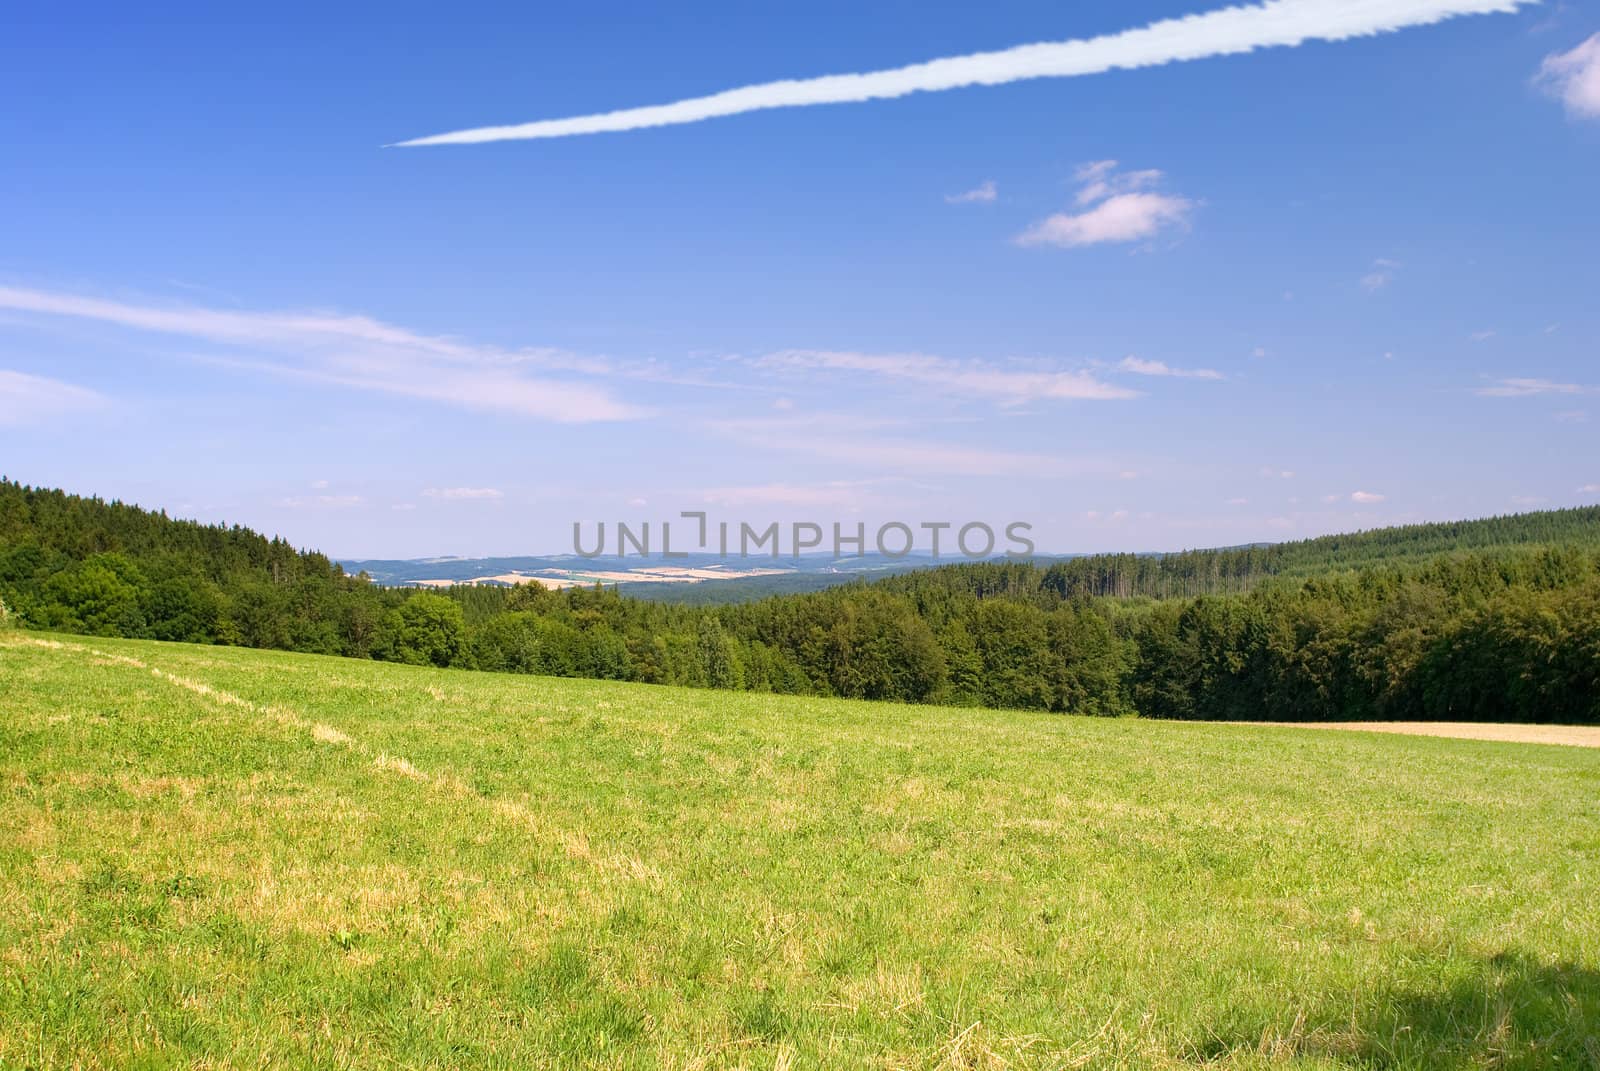 Landscape with the field and followed by an aircraft in the sky